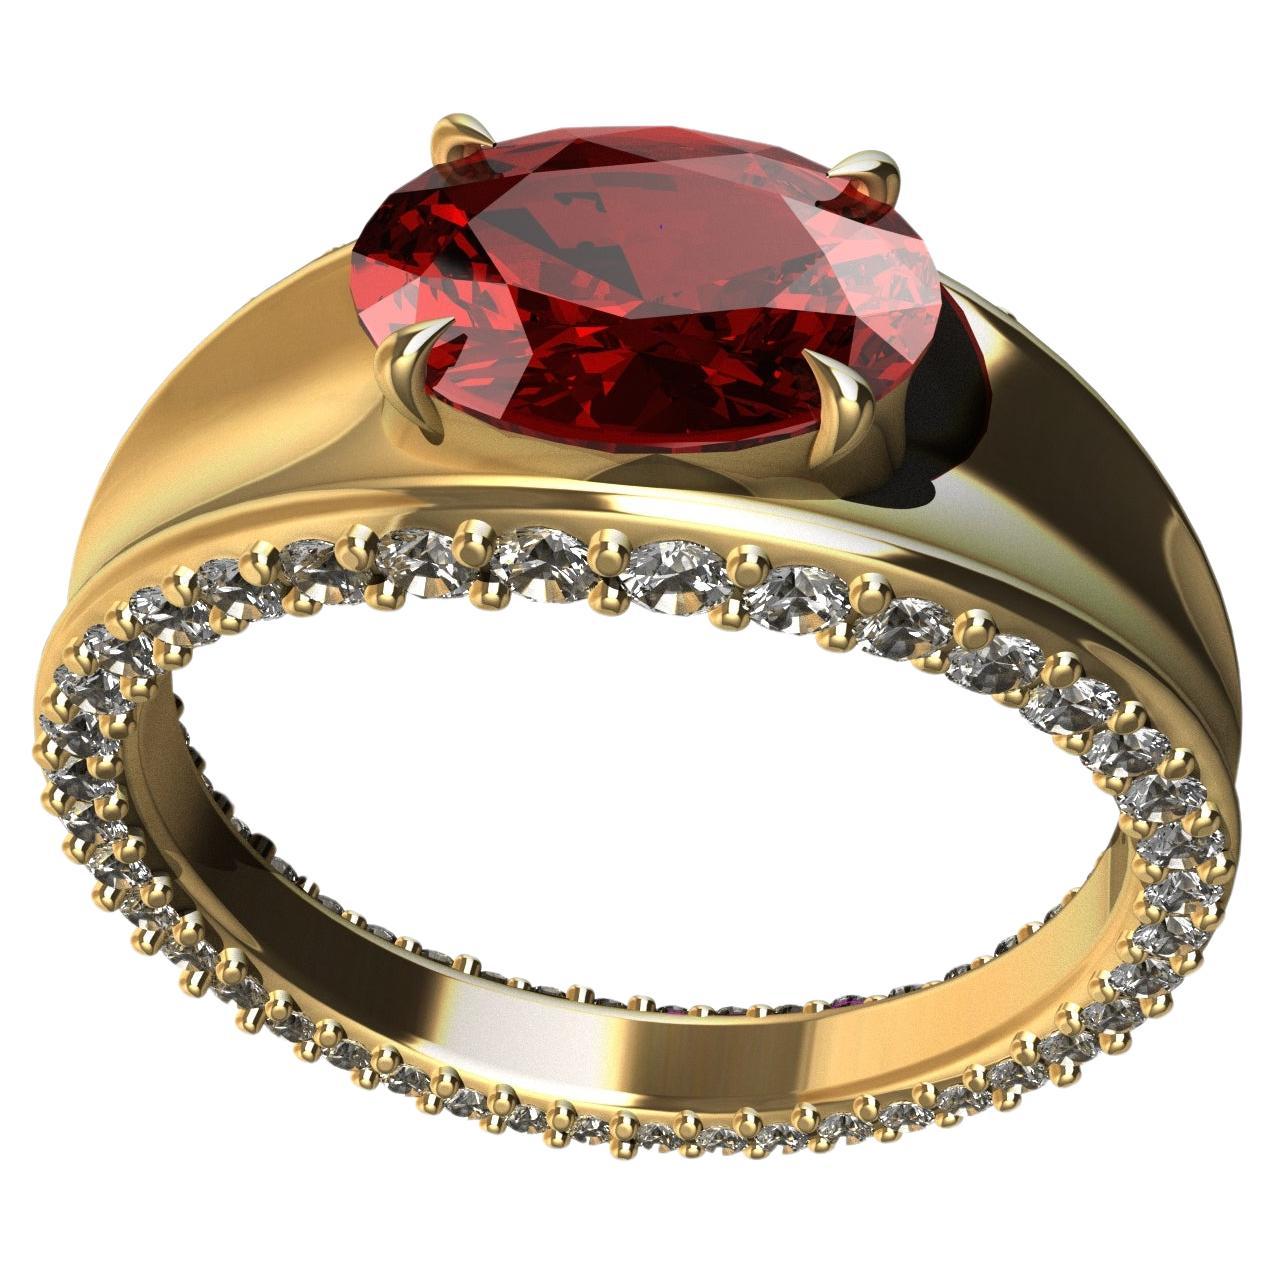 For Sale:  18 Karat Yellow Gold Concave Tapered GIA 2.2 Carat  Ruby and Diamonds Ring